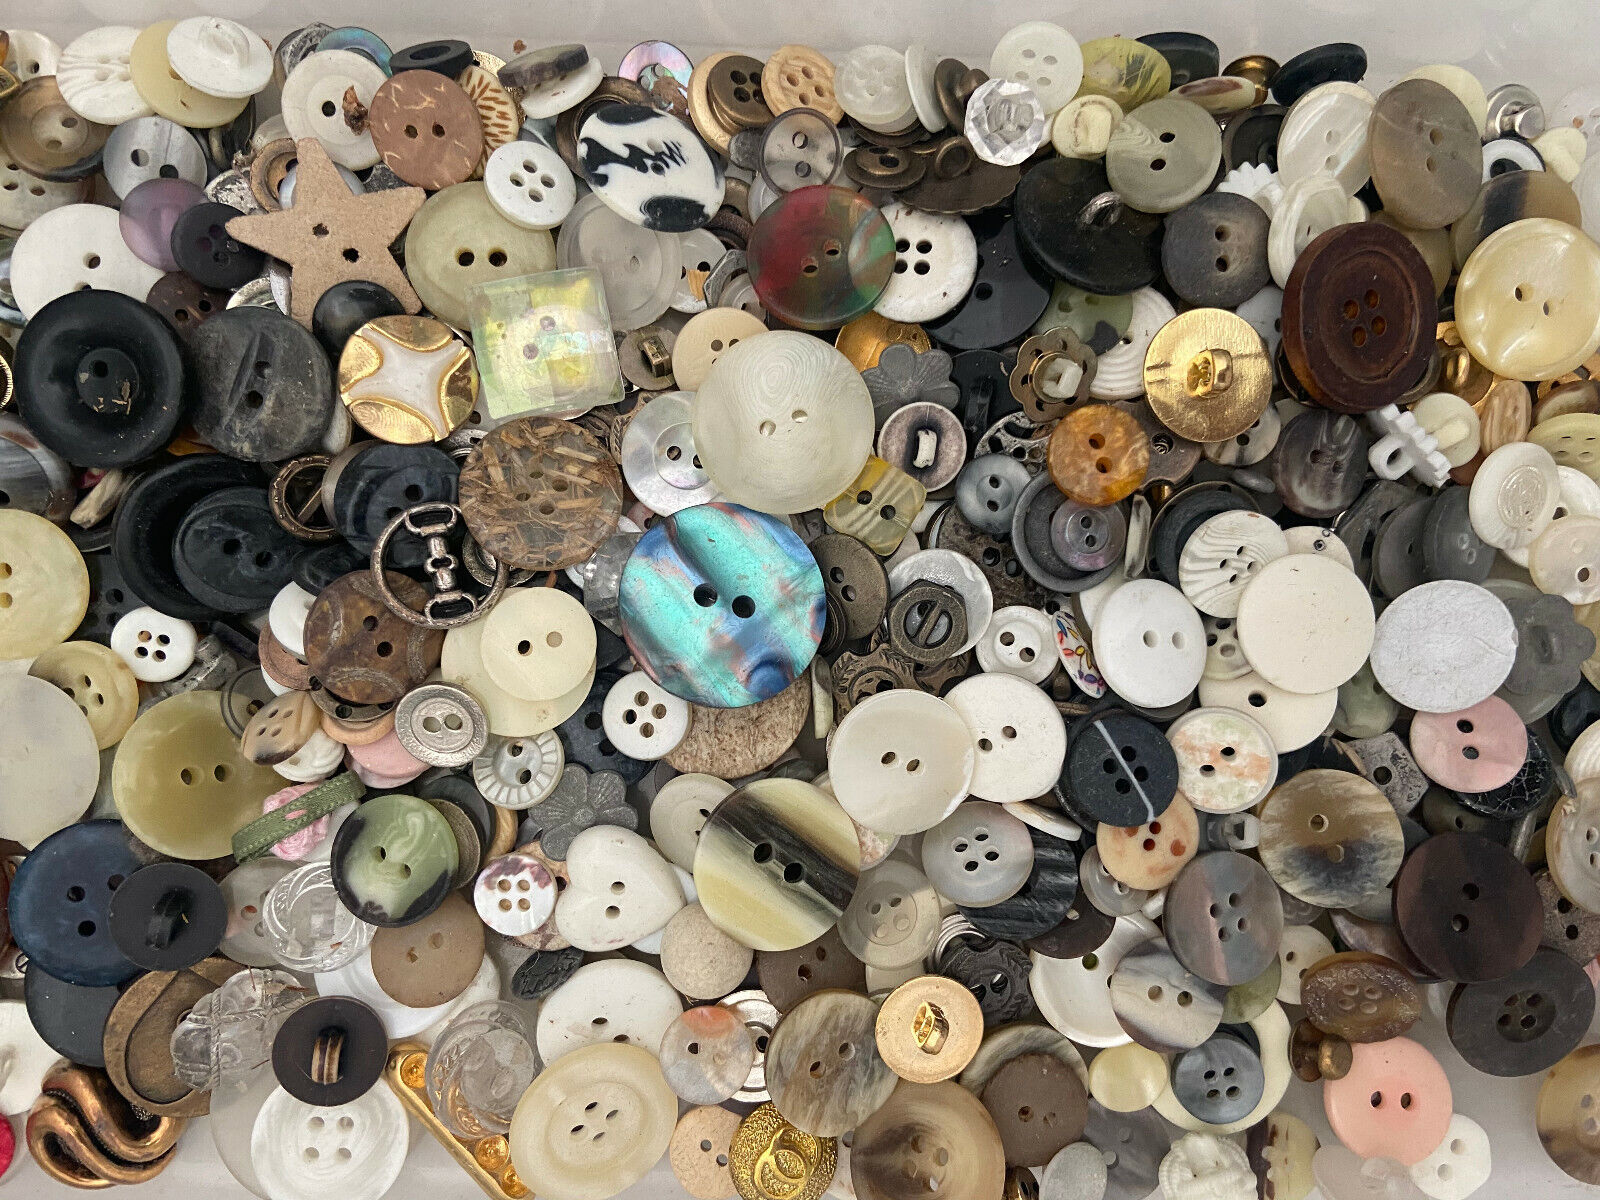 BEST MIX 1 lb Of Premium Quality Buttons All Types & Sizes Avg 500 pcs 